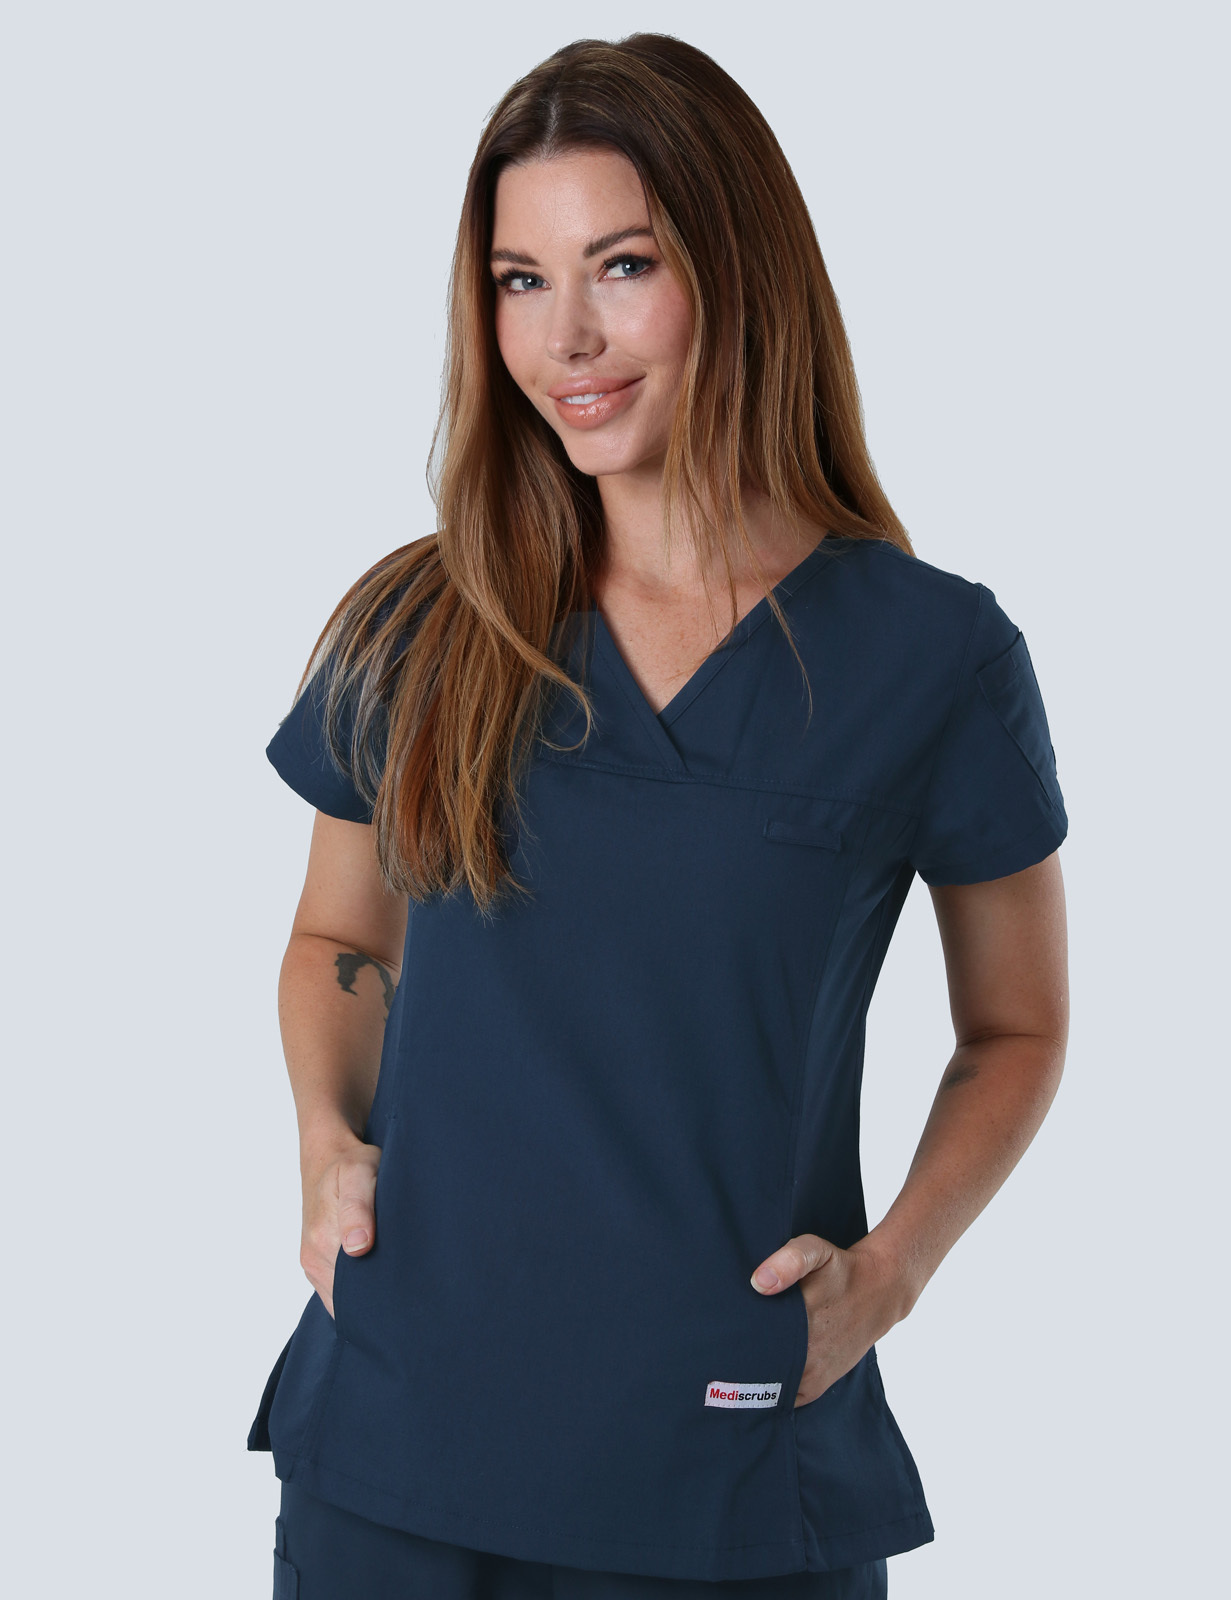 The Alfred Hospital - Emergency & Trauma Centre Doctor (Women's Fit Solid Scrub Top and Cargo Pants in Navy incl Logos)